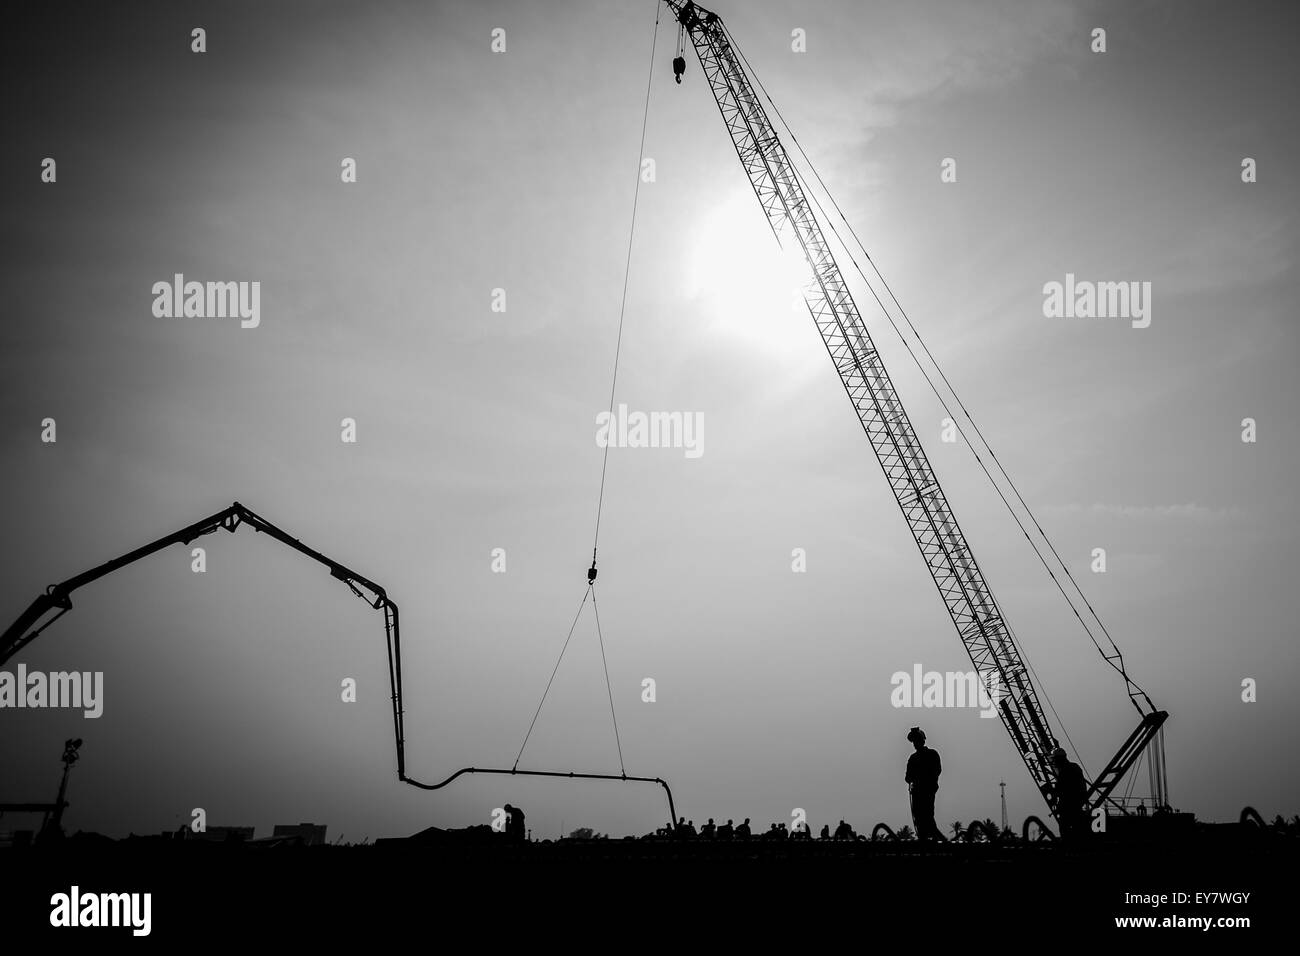 Tuxpan. 22nd July, 2015. Image taken on July 22, 2015 shows a Mexican employee working at the construction site of the Tuxpan Port Terminal in Tuxpan city, Veracruz state, Mexico. Around 90 employees from China and 100 from Mexico have been working for a year in the construction site of the port terminal for containers, vehicles and agricultural material. This is the second construction project made by Chinese company with labor from Chinese and Mexican origins. © Pedro Mera/Xinhua/Alamy Live News Stock Photo